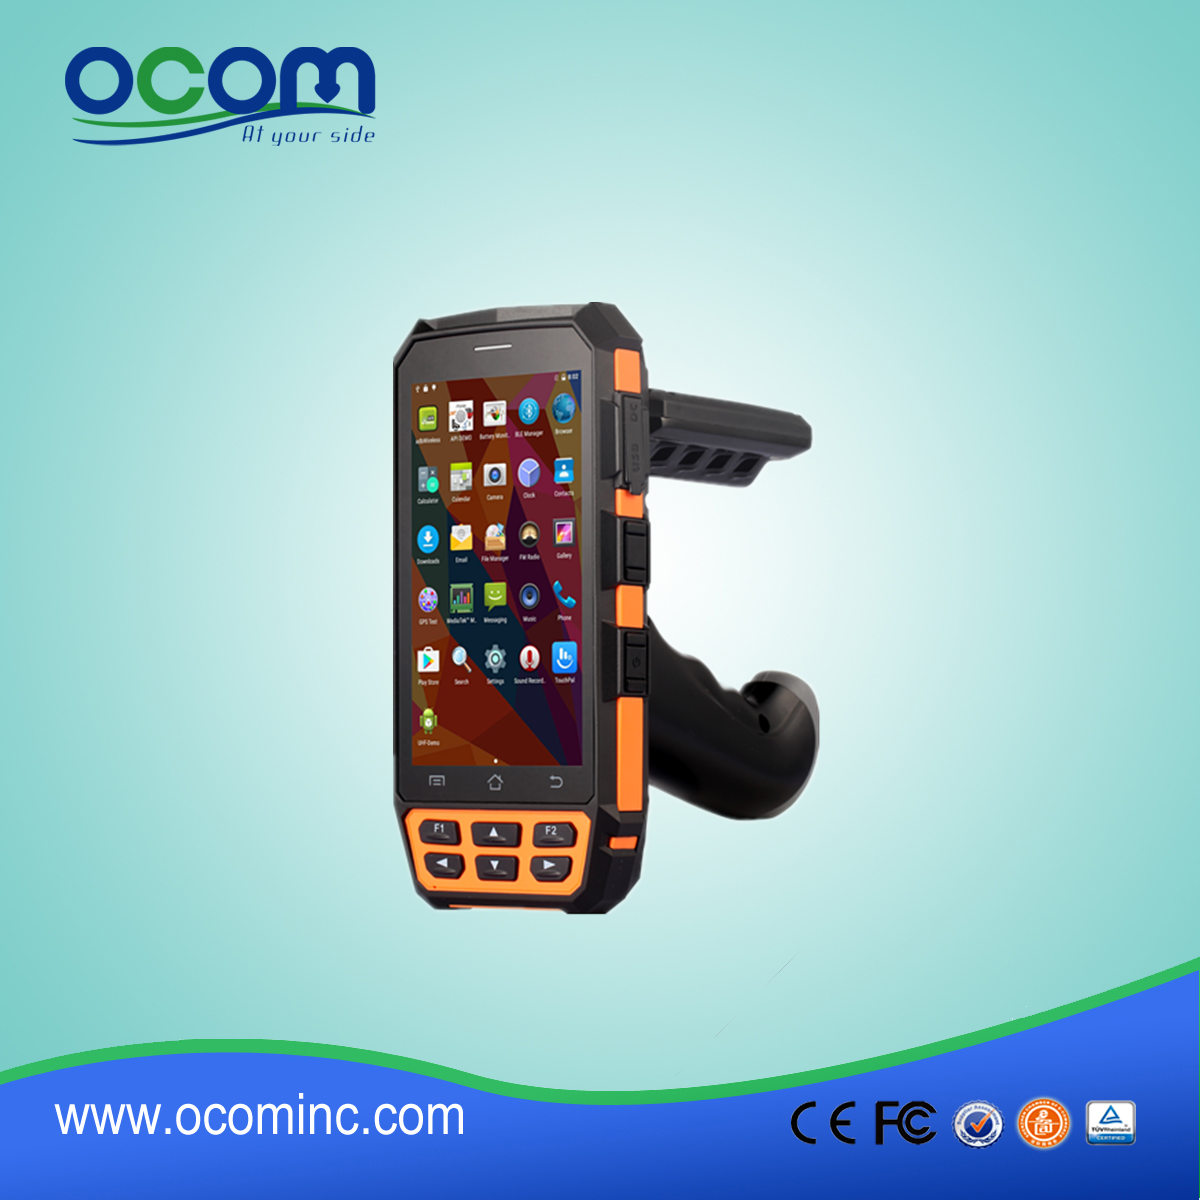 OCBS-D5000 Industrial IP65 Handheld PDA mit Android OS